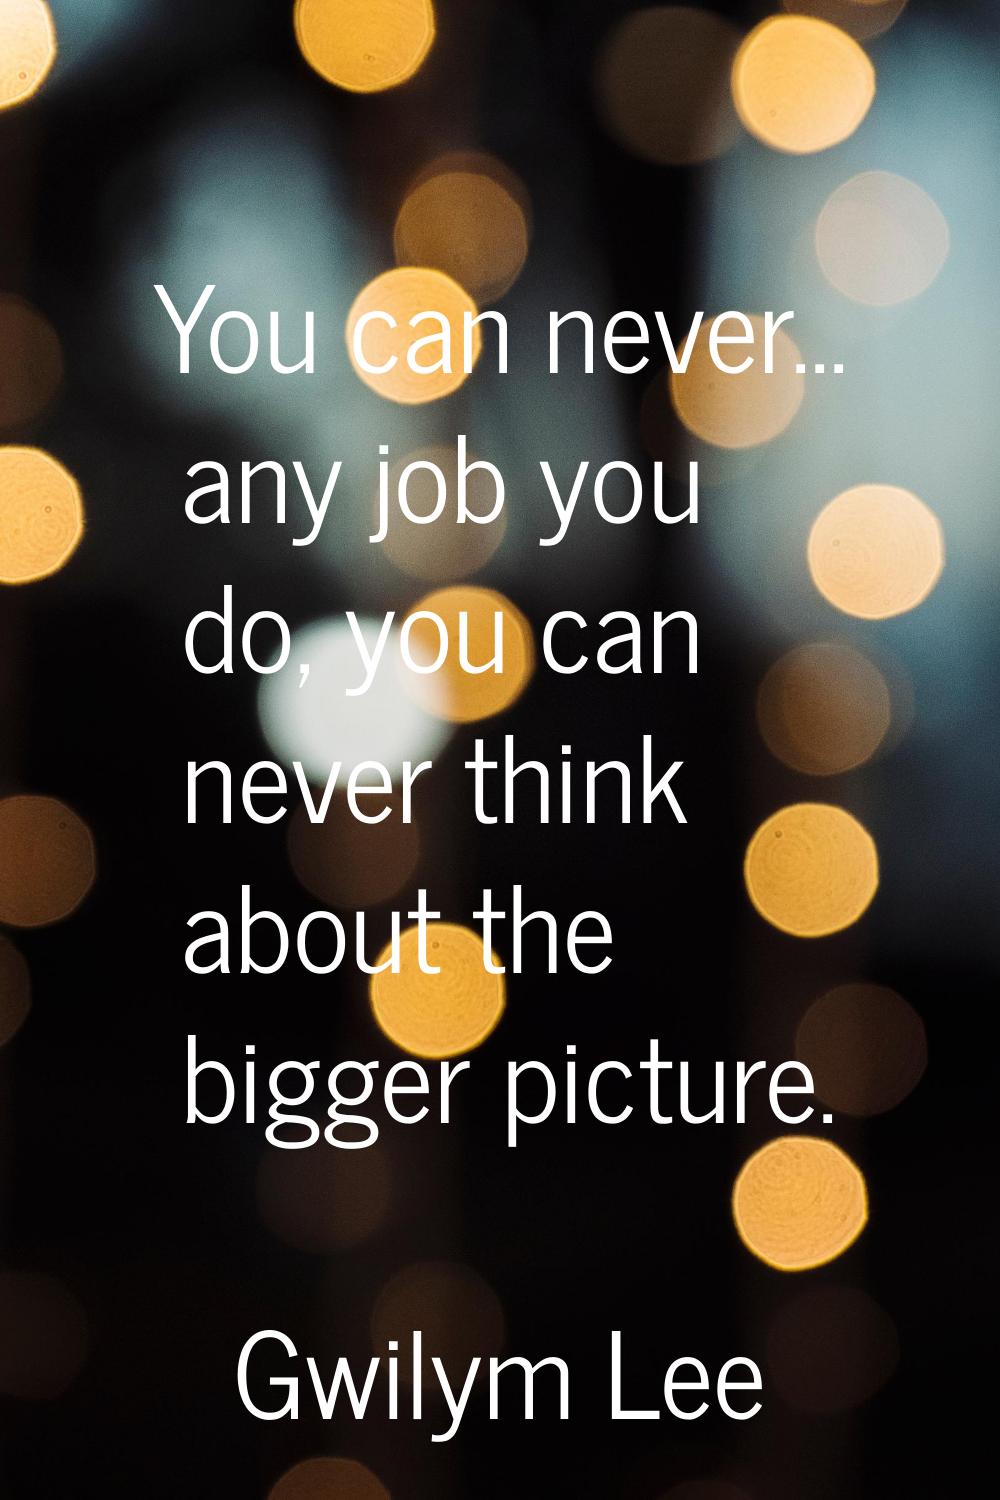 You can never... any job you do, you can never think about the bigger picture.